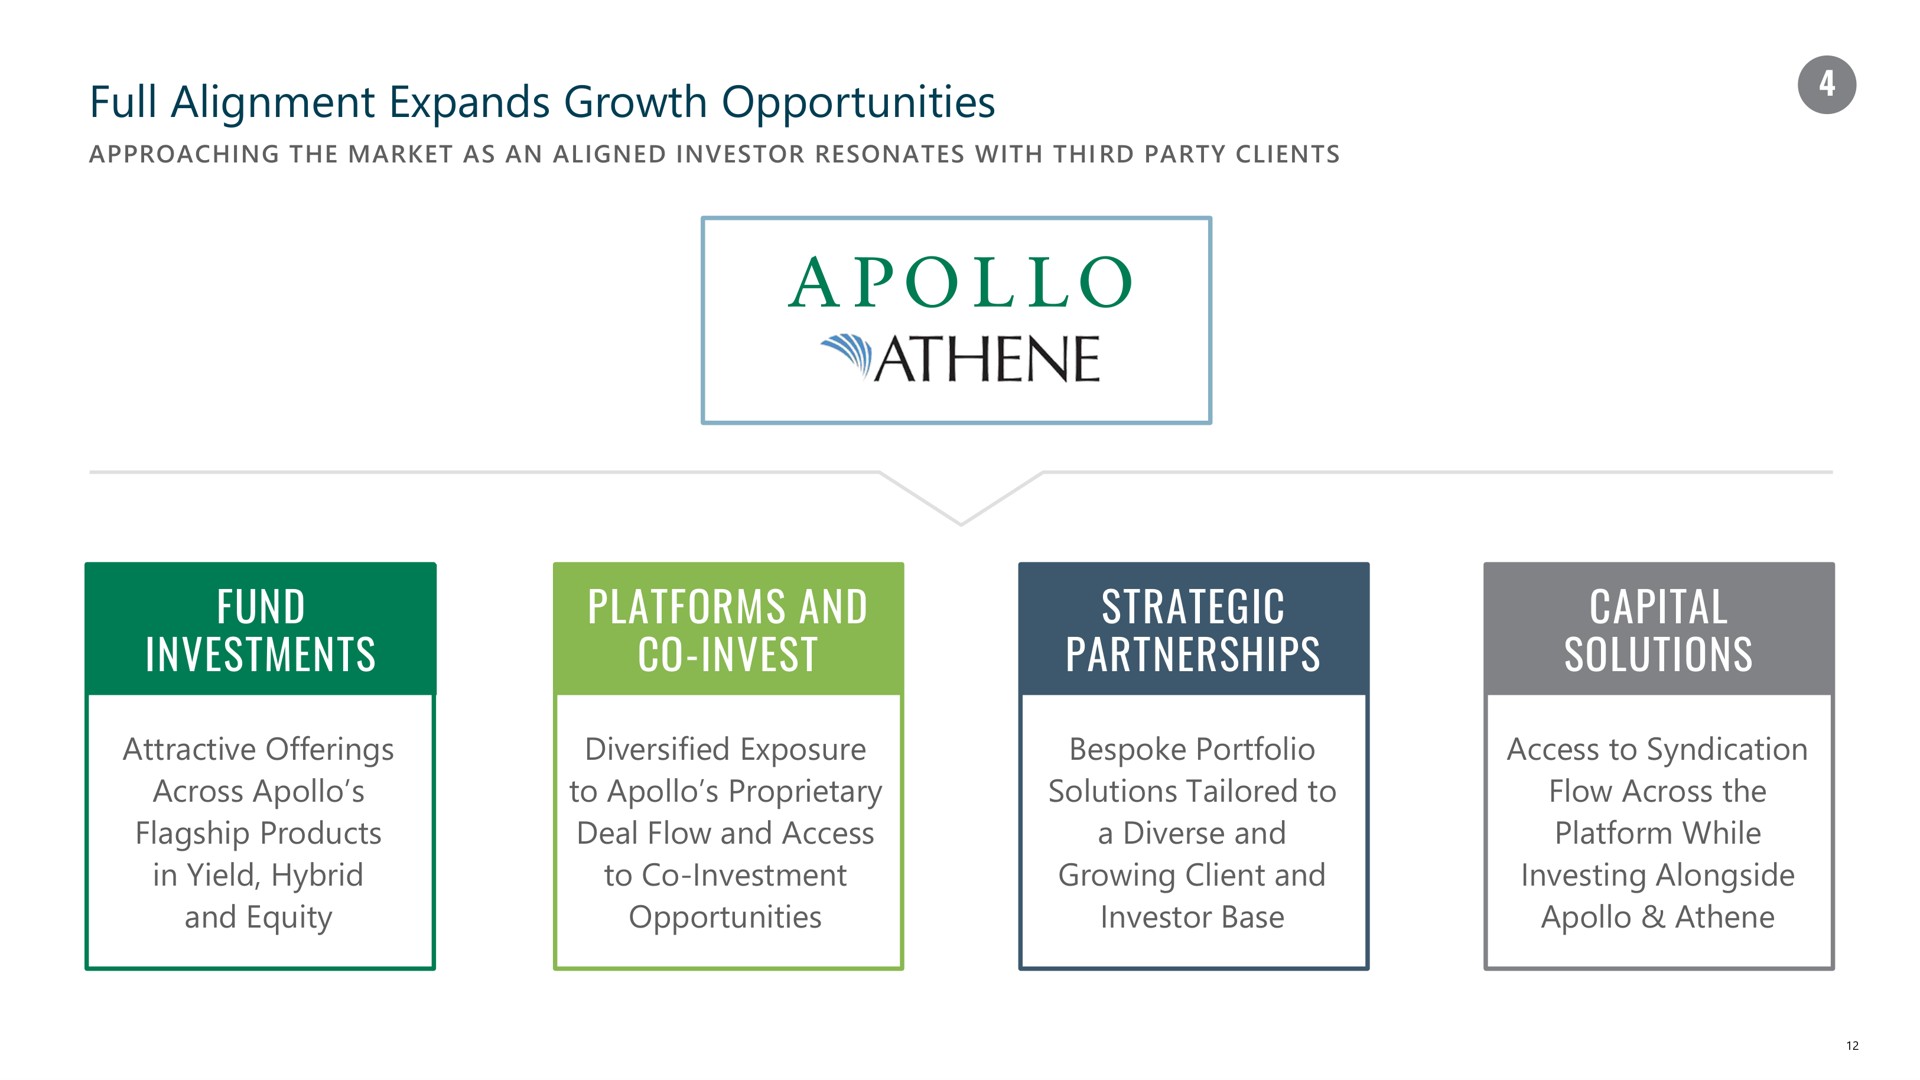 full alignment expands growth opportunities fund investments platforms and invest strategic partnerships capital solutions cuts | Apollo Global Management